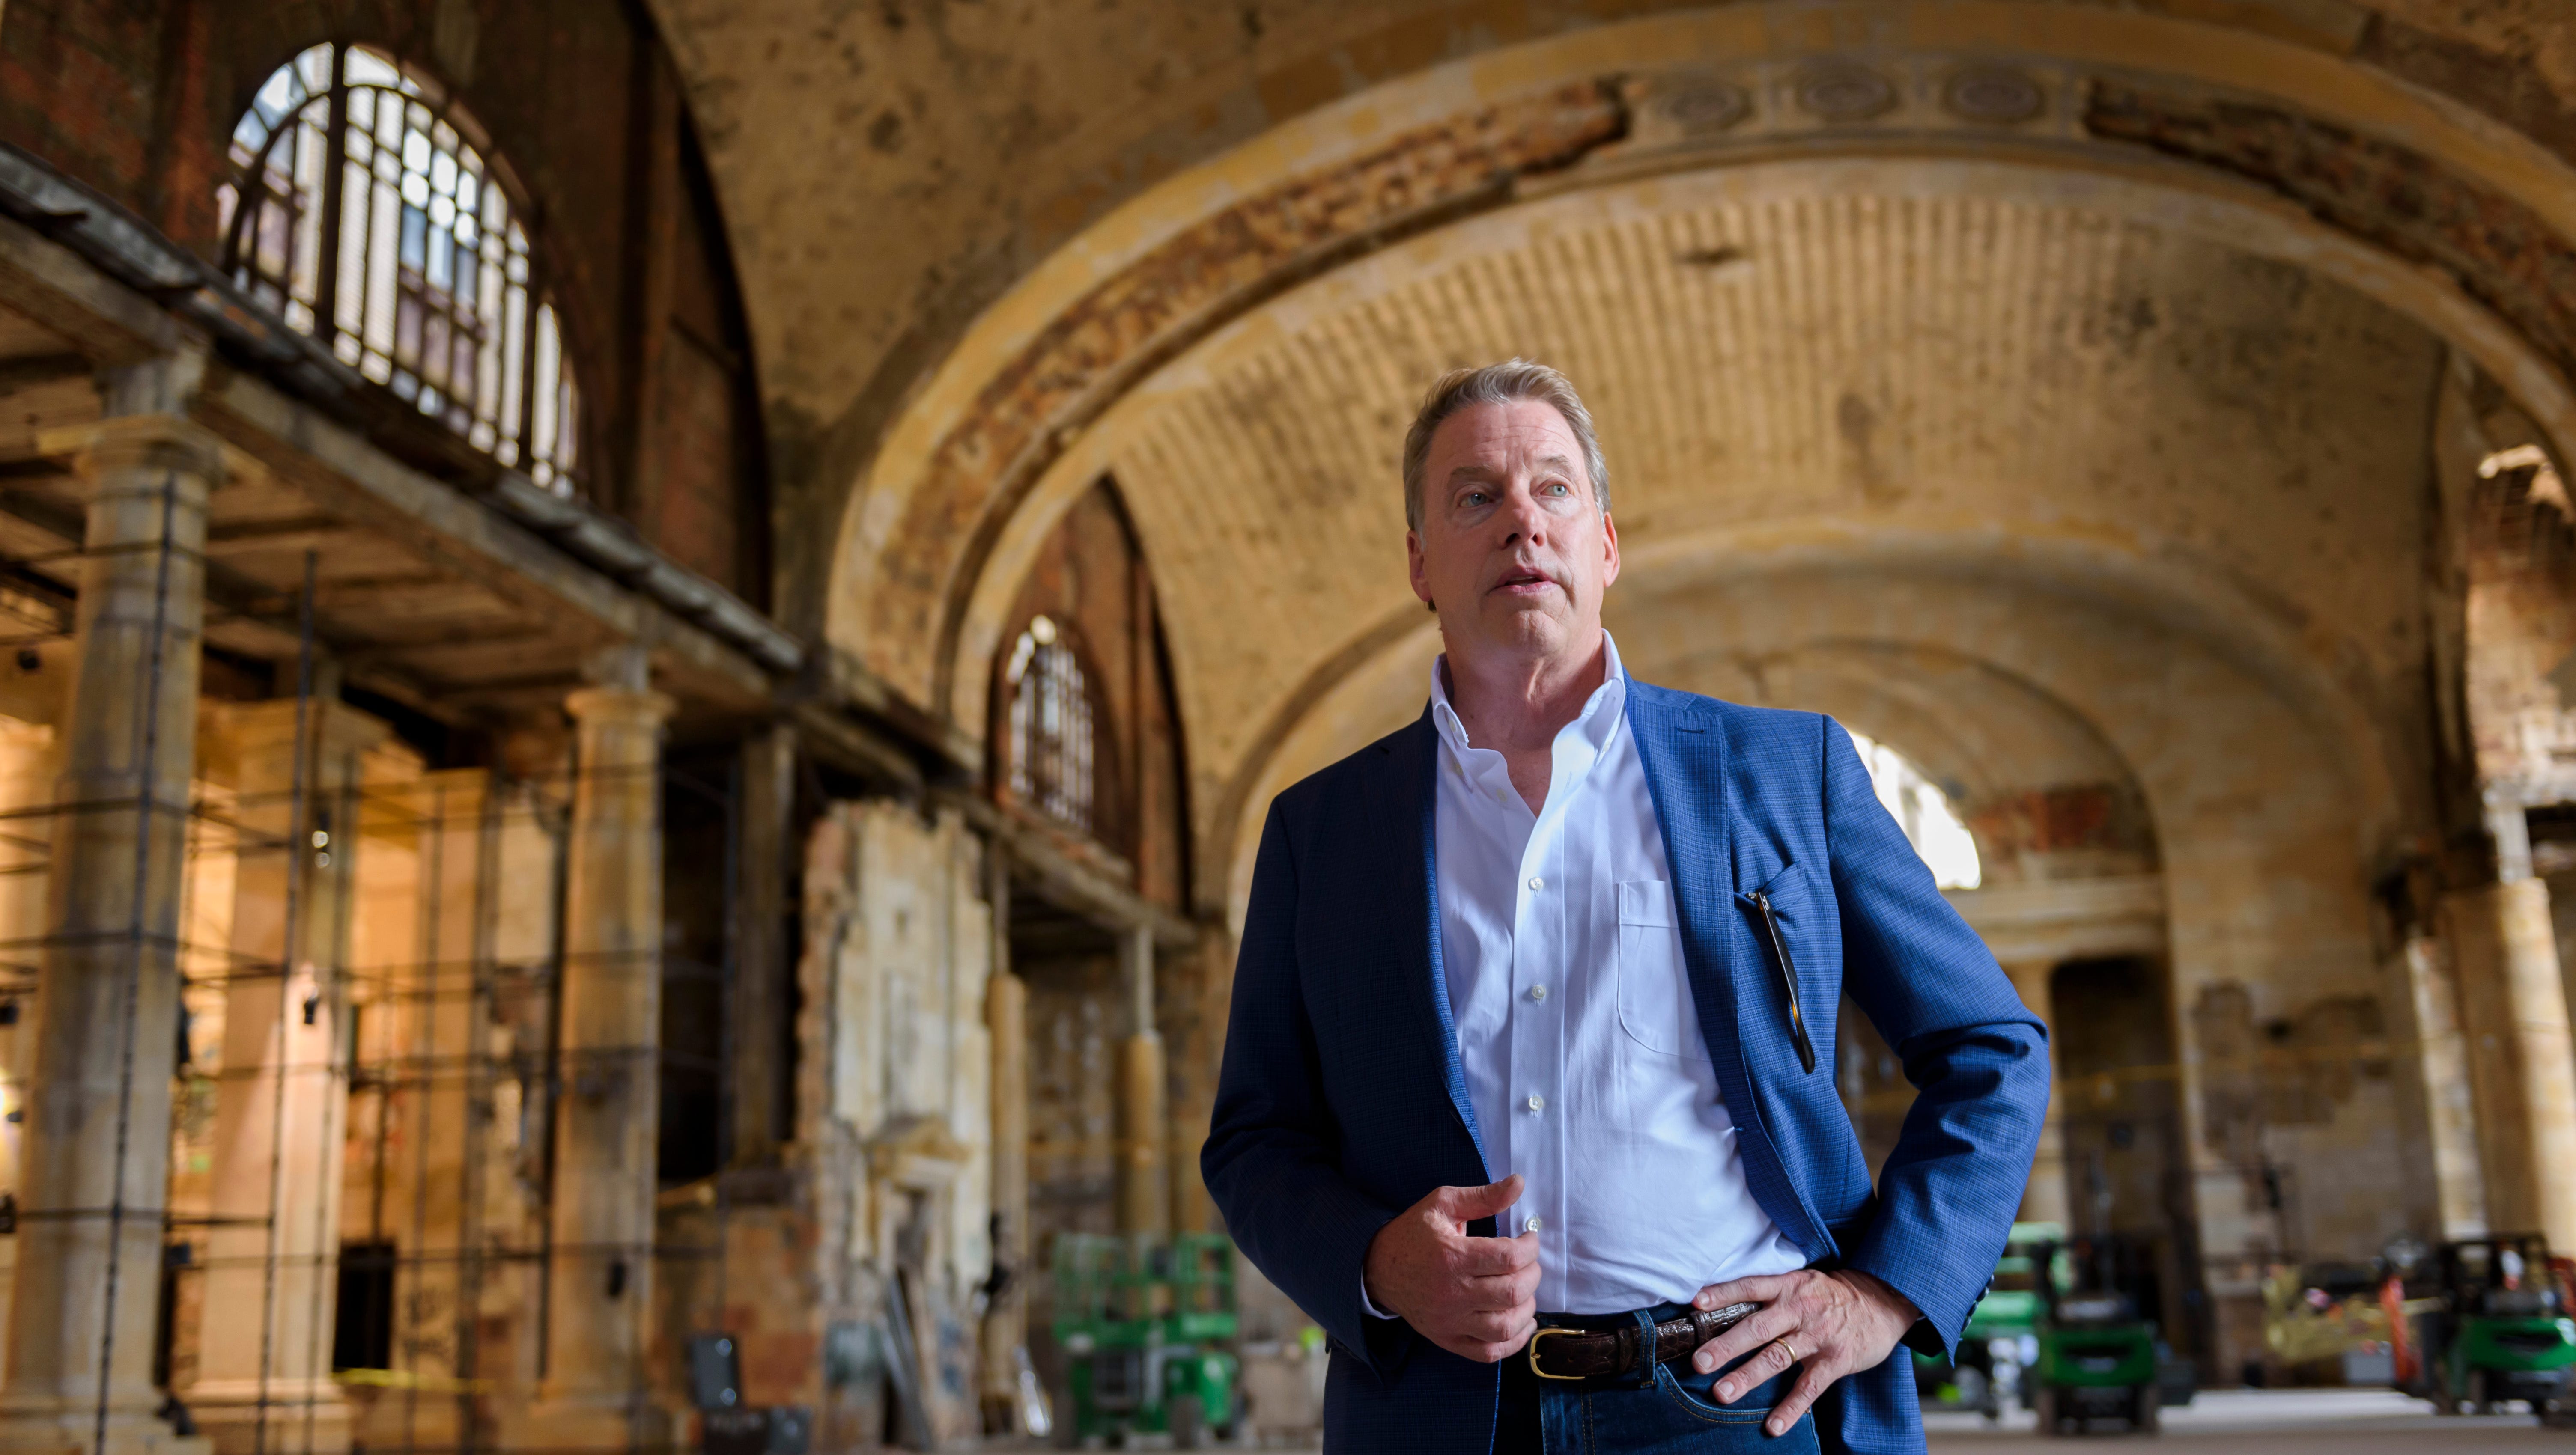 Ford Executive Chairman Bill Ford Jr. stands in the lobby of the former Michigan Central Depot train station in Detroit, June 14, 2018. Ford Motor Co.'s purchase of the building and several others in Corktown will allow the automaker to build a new mobility corridor along Michigan Avenue, from Corktown to its facilities in Dearborn, Willow Run and the University of Michigan campus.